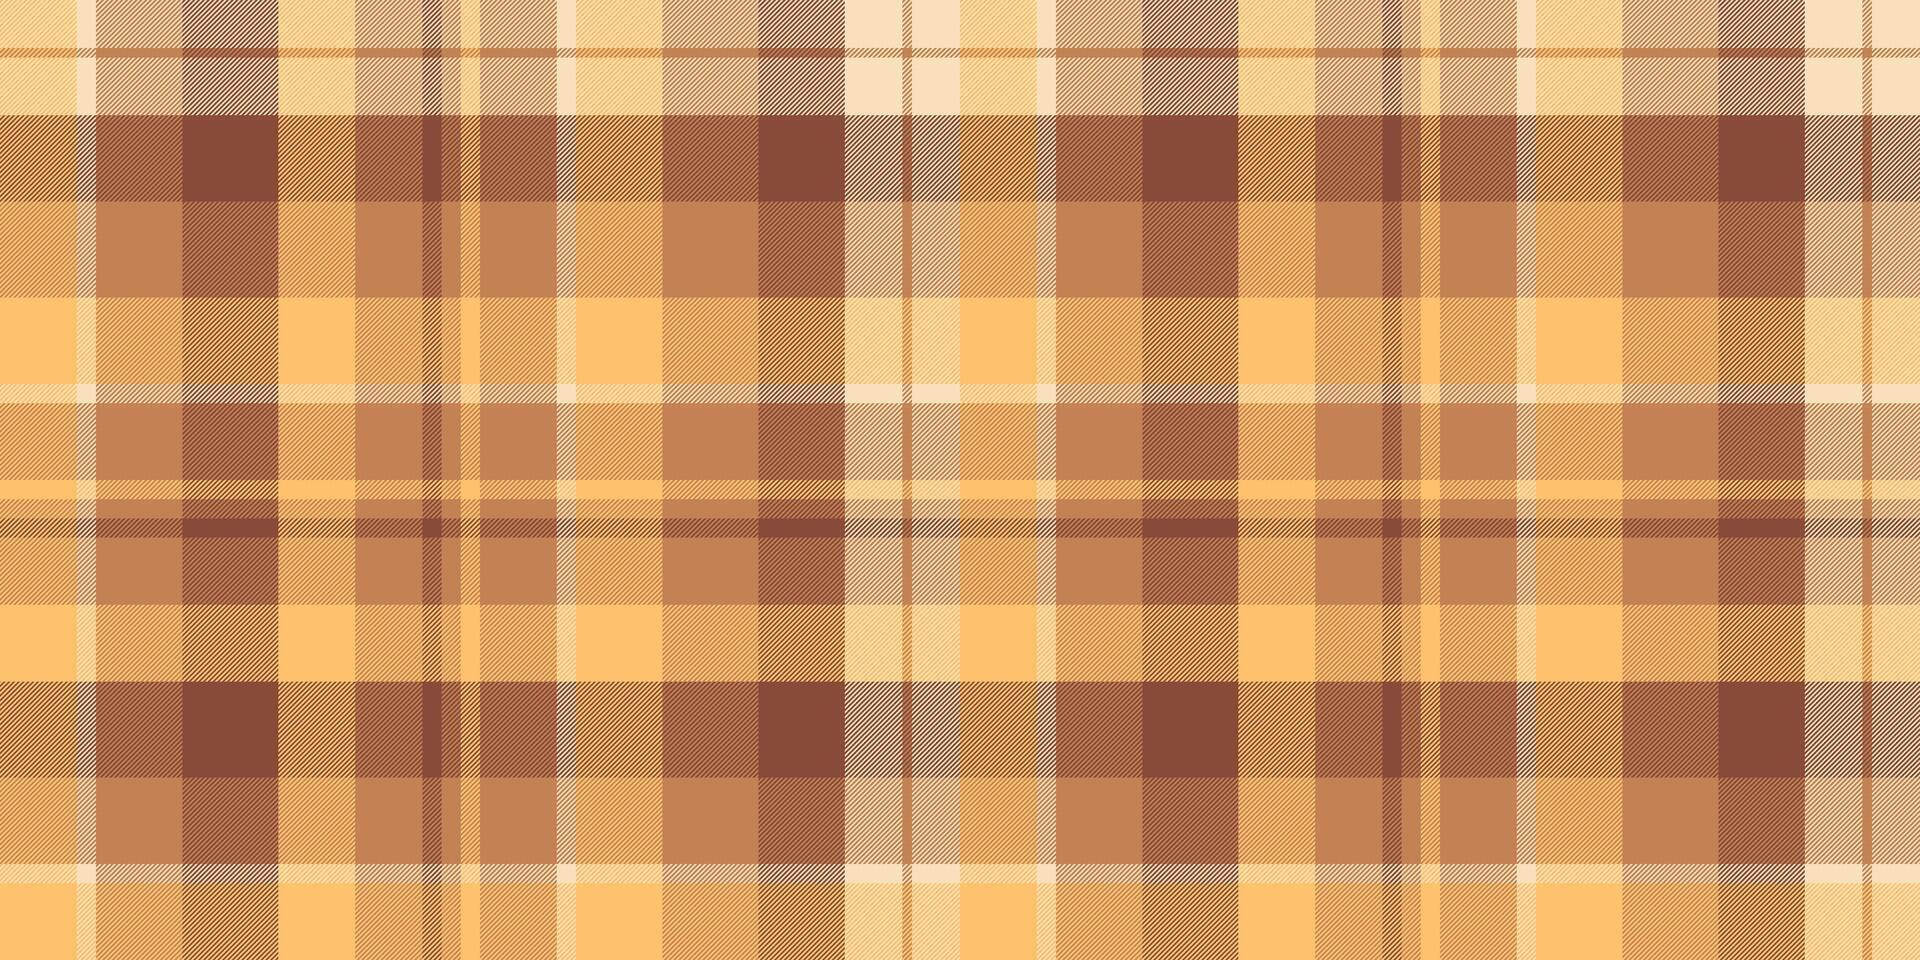 Scotland plaid texture fabric, fluffy textile check seamless. Frame tartan vector pattern background in orange and red colors.